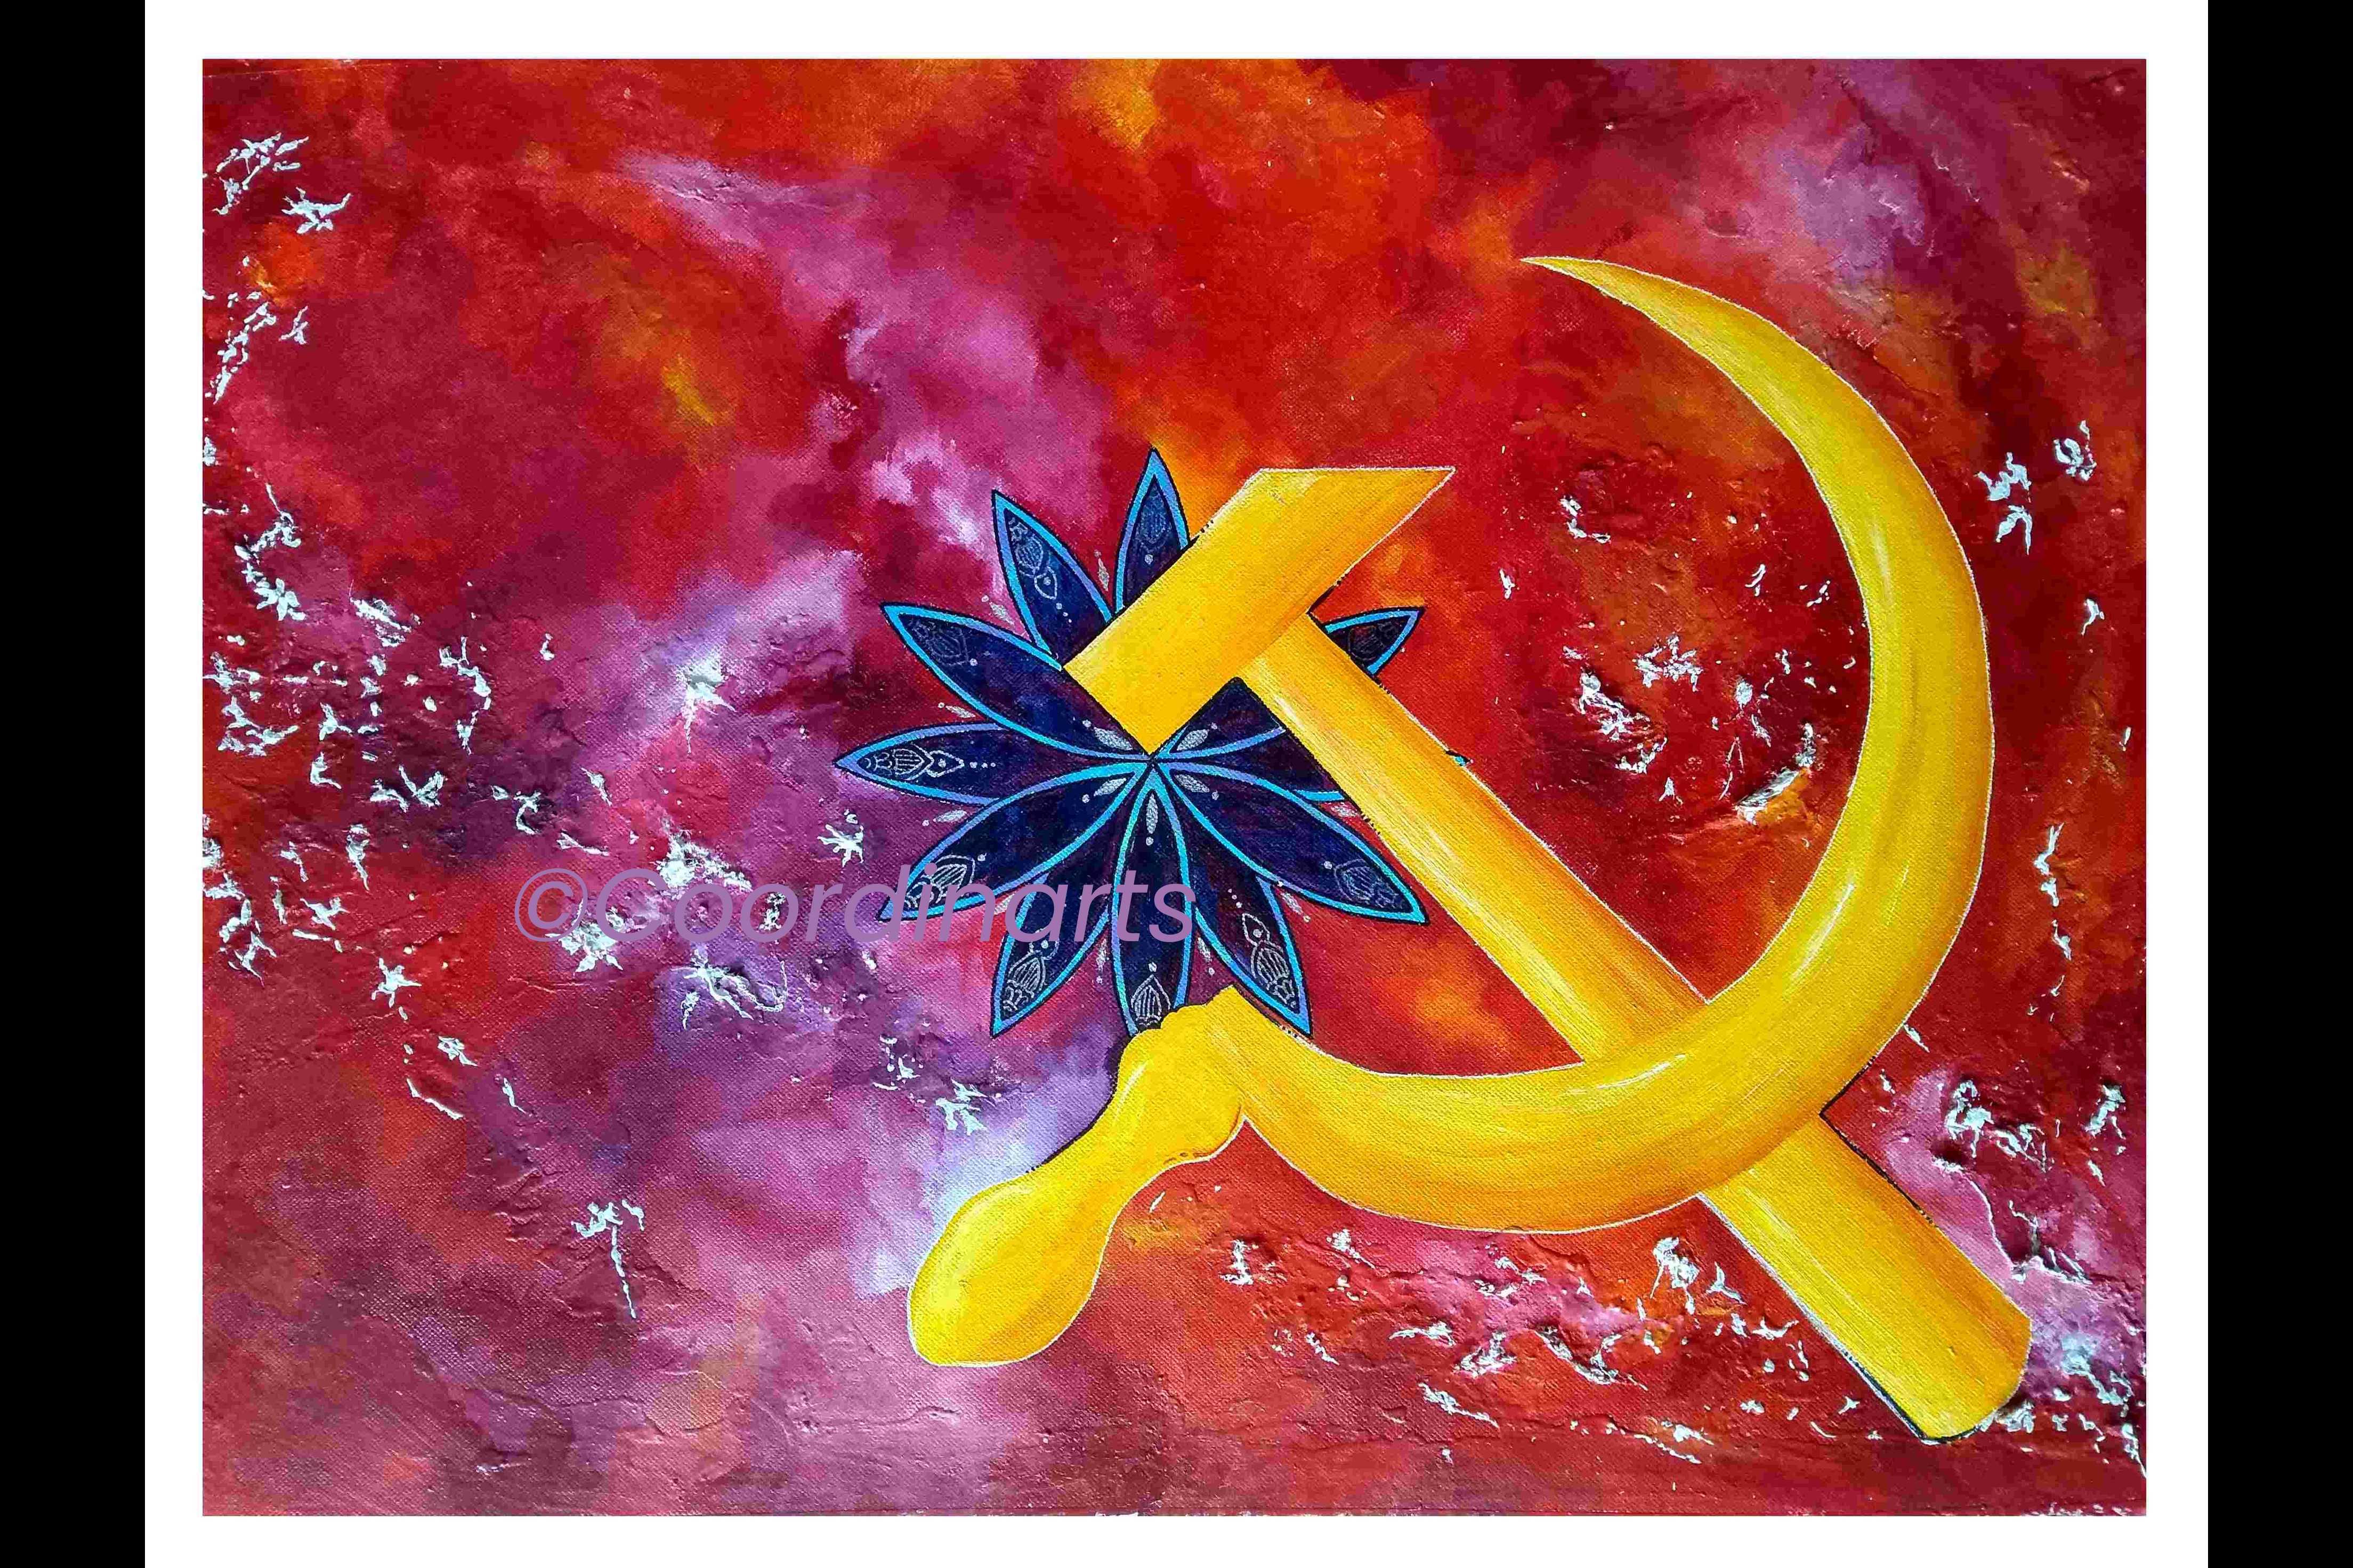 The Hammer and Sickle